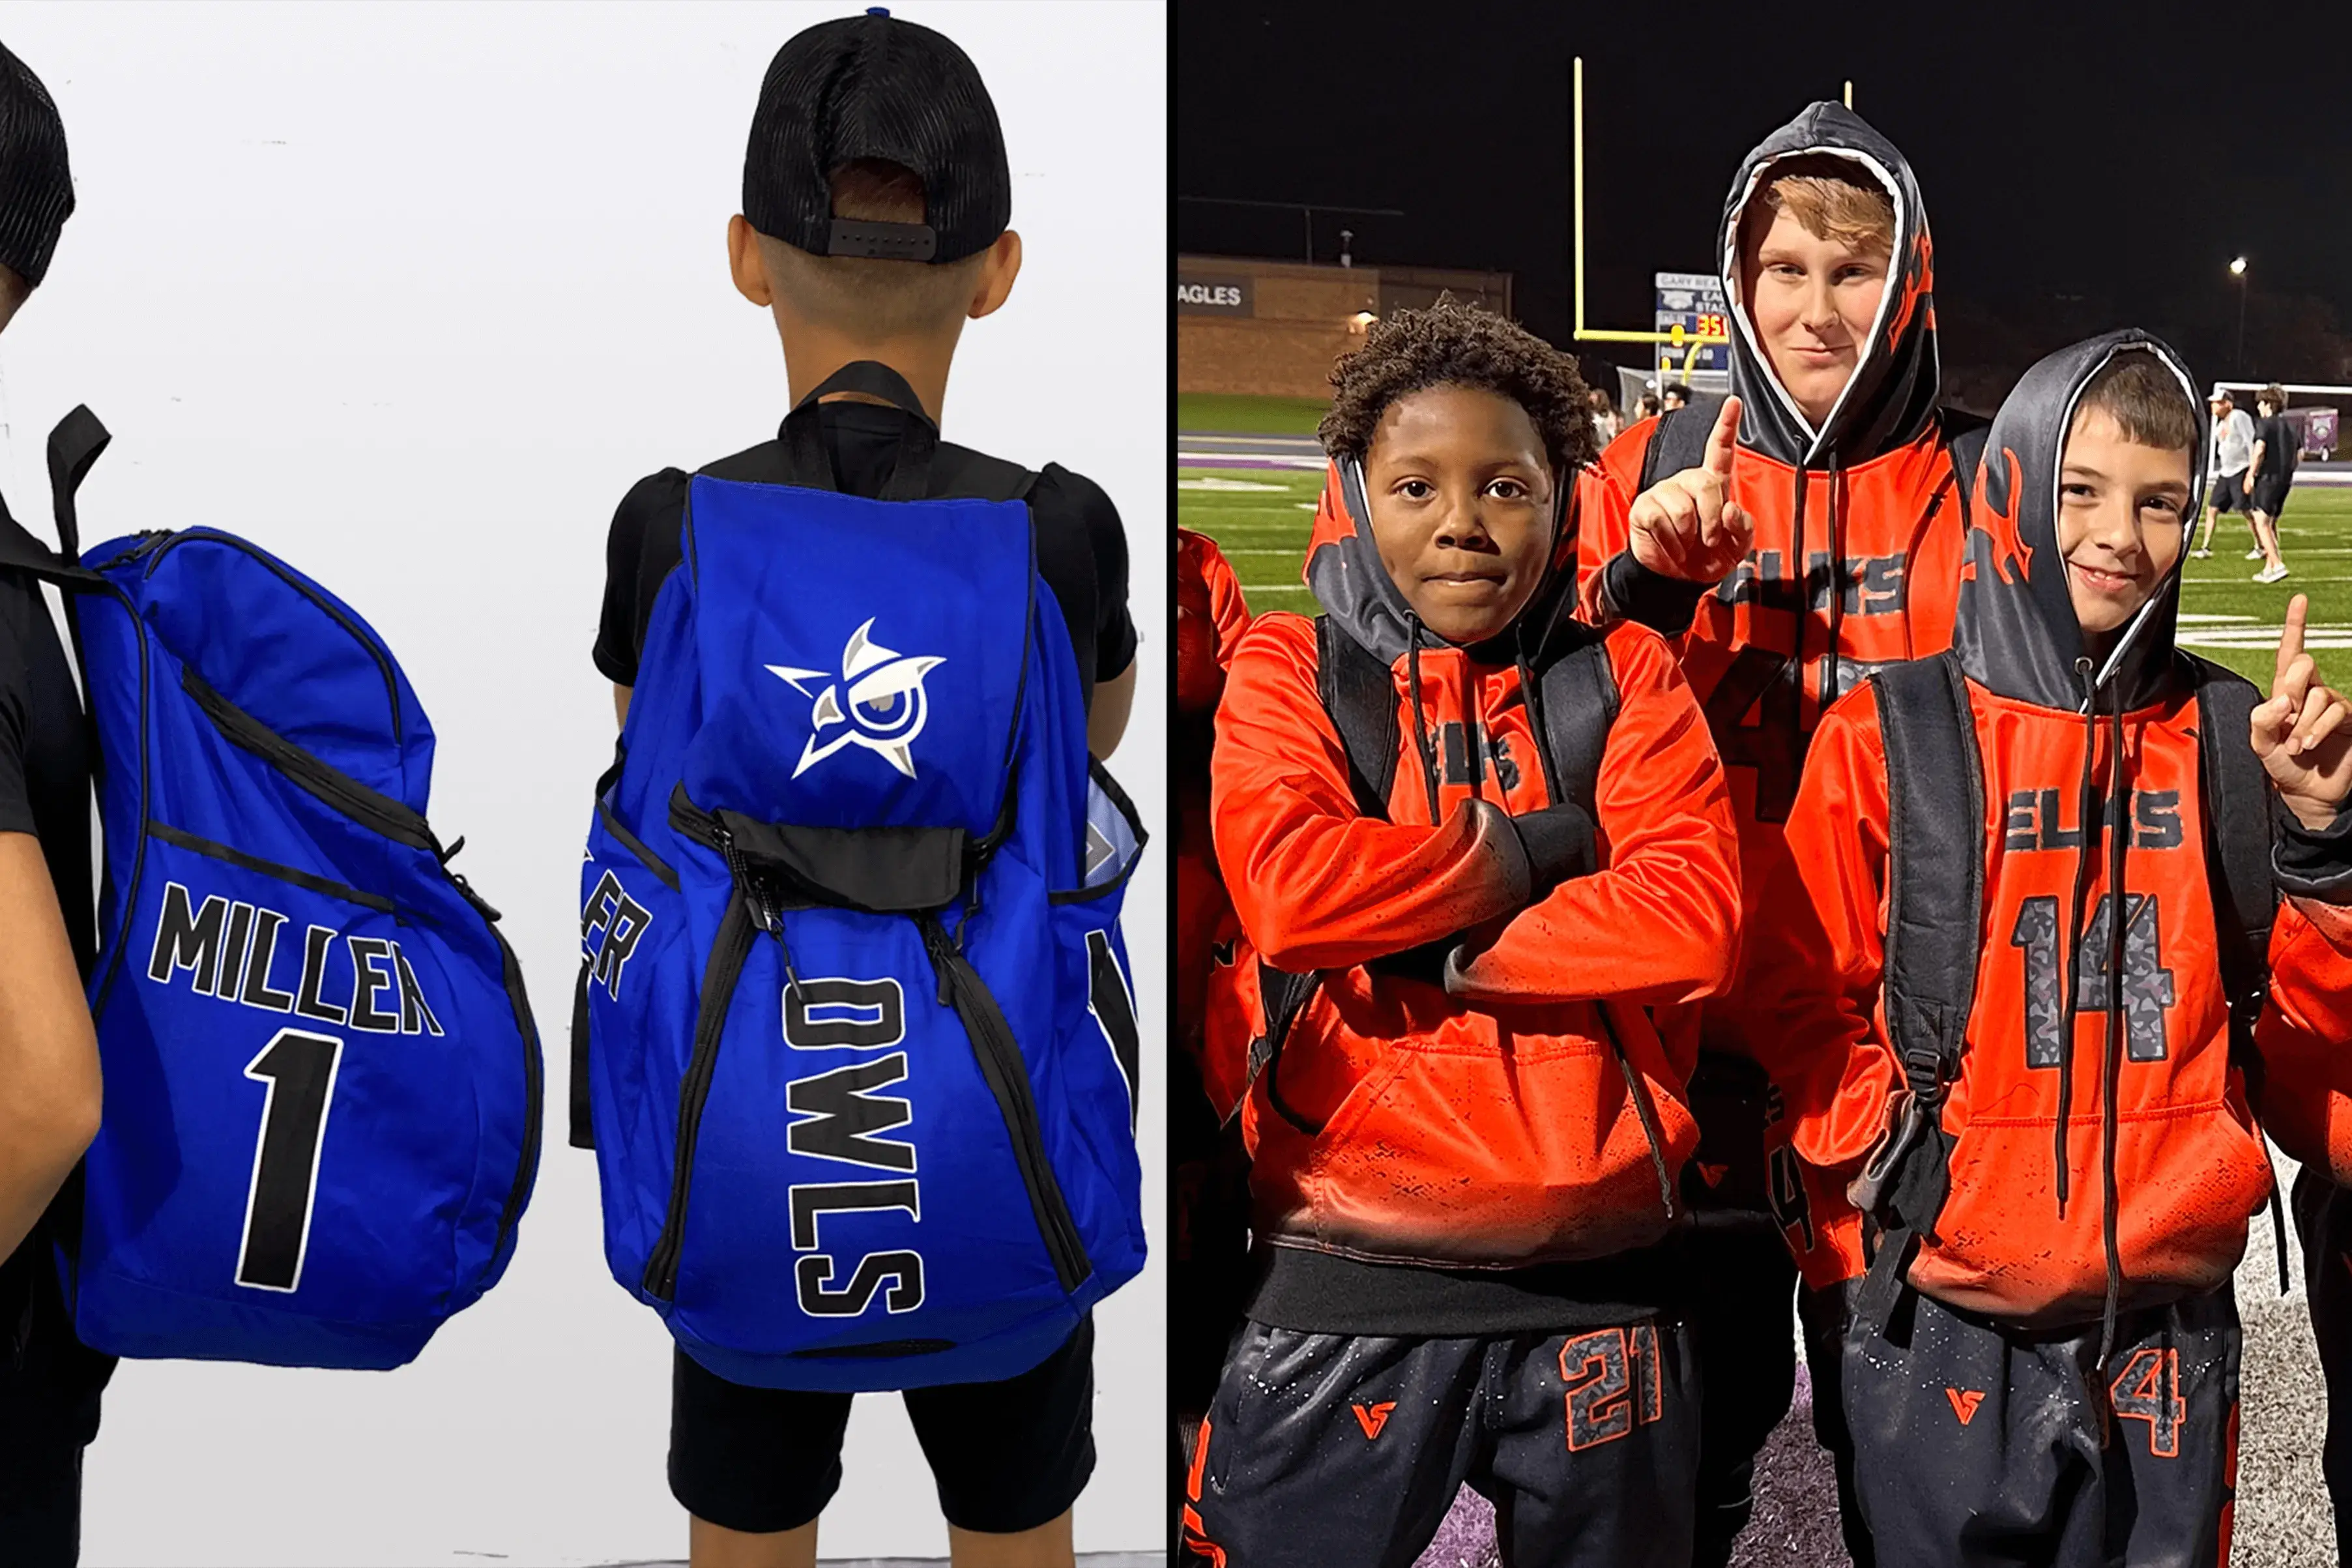 Joshua Owls Custom Backpacks on Left Side and Burleson Elks in Custom Warm Up Suits on the Right Sdie